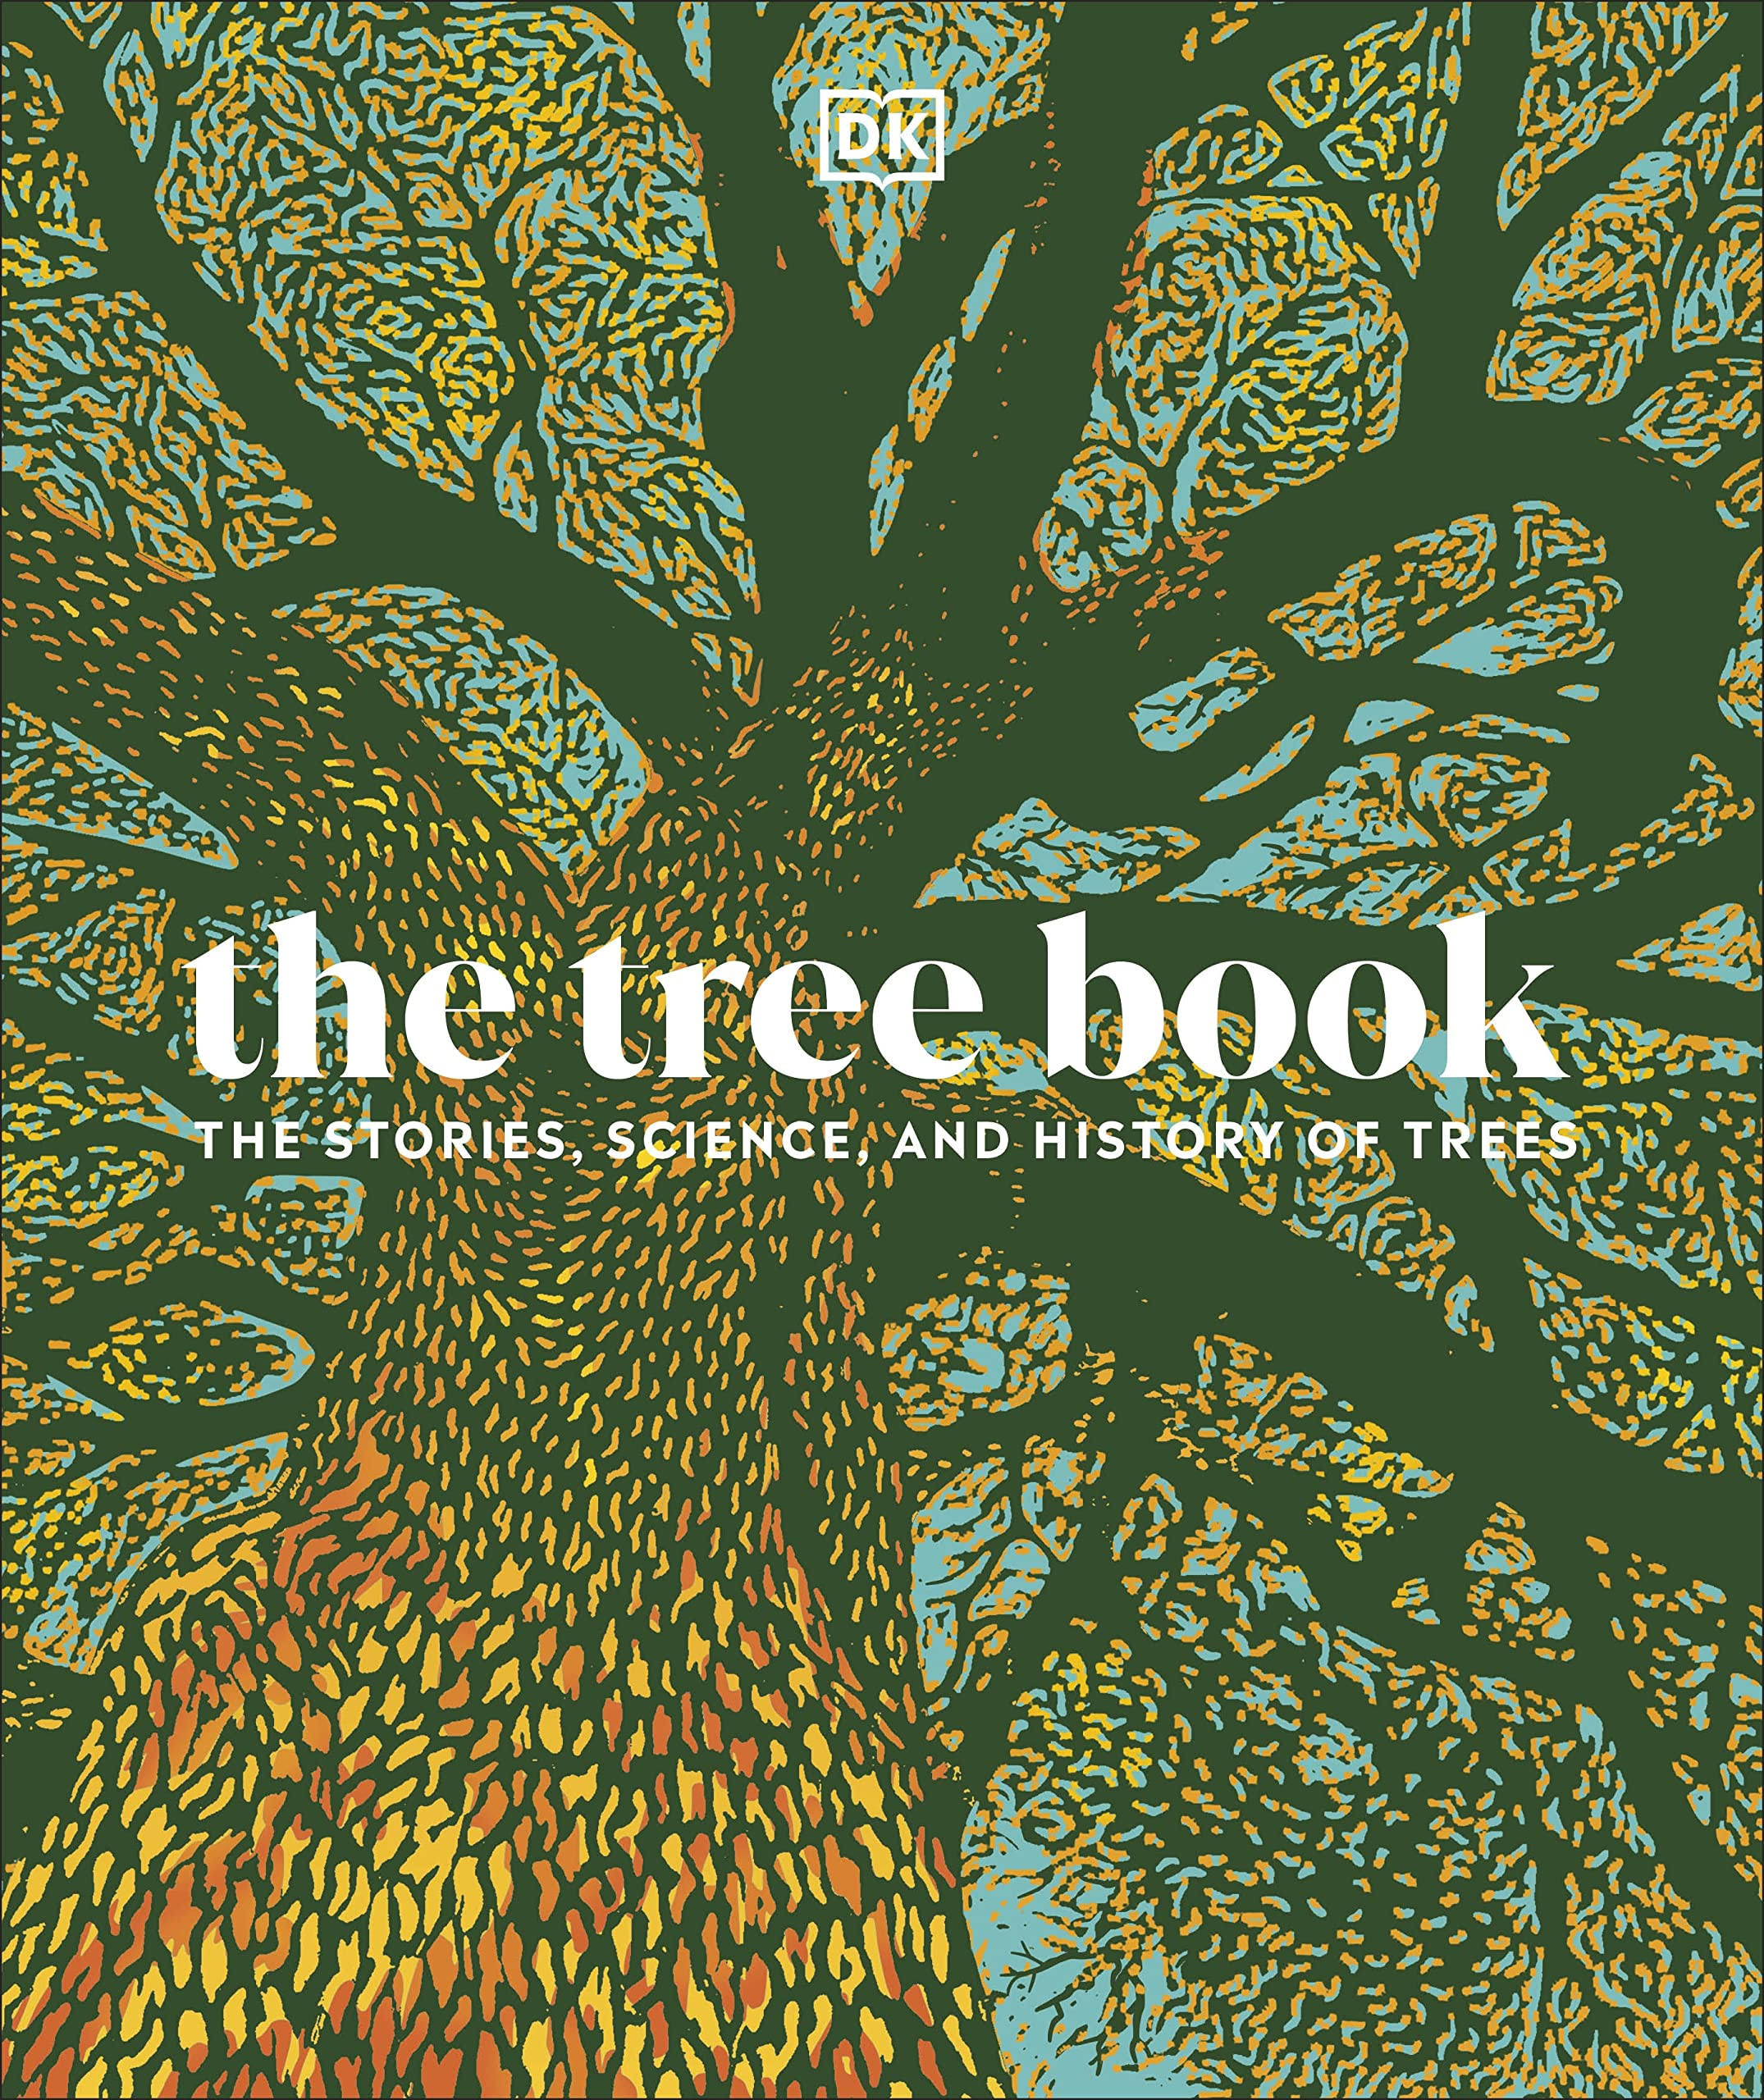 The Tree Book: Inside the Secret Life of Trees [Book]